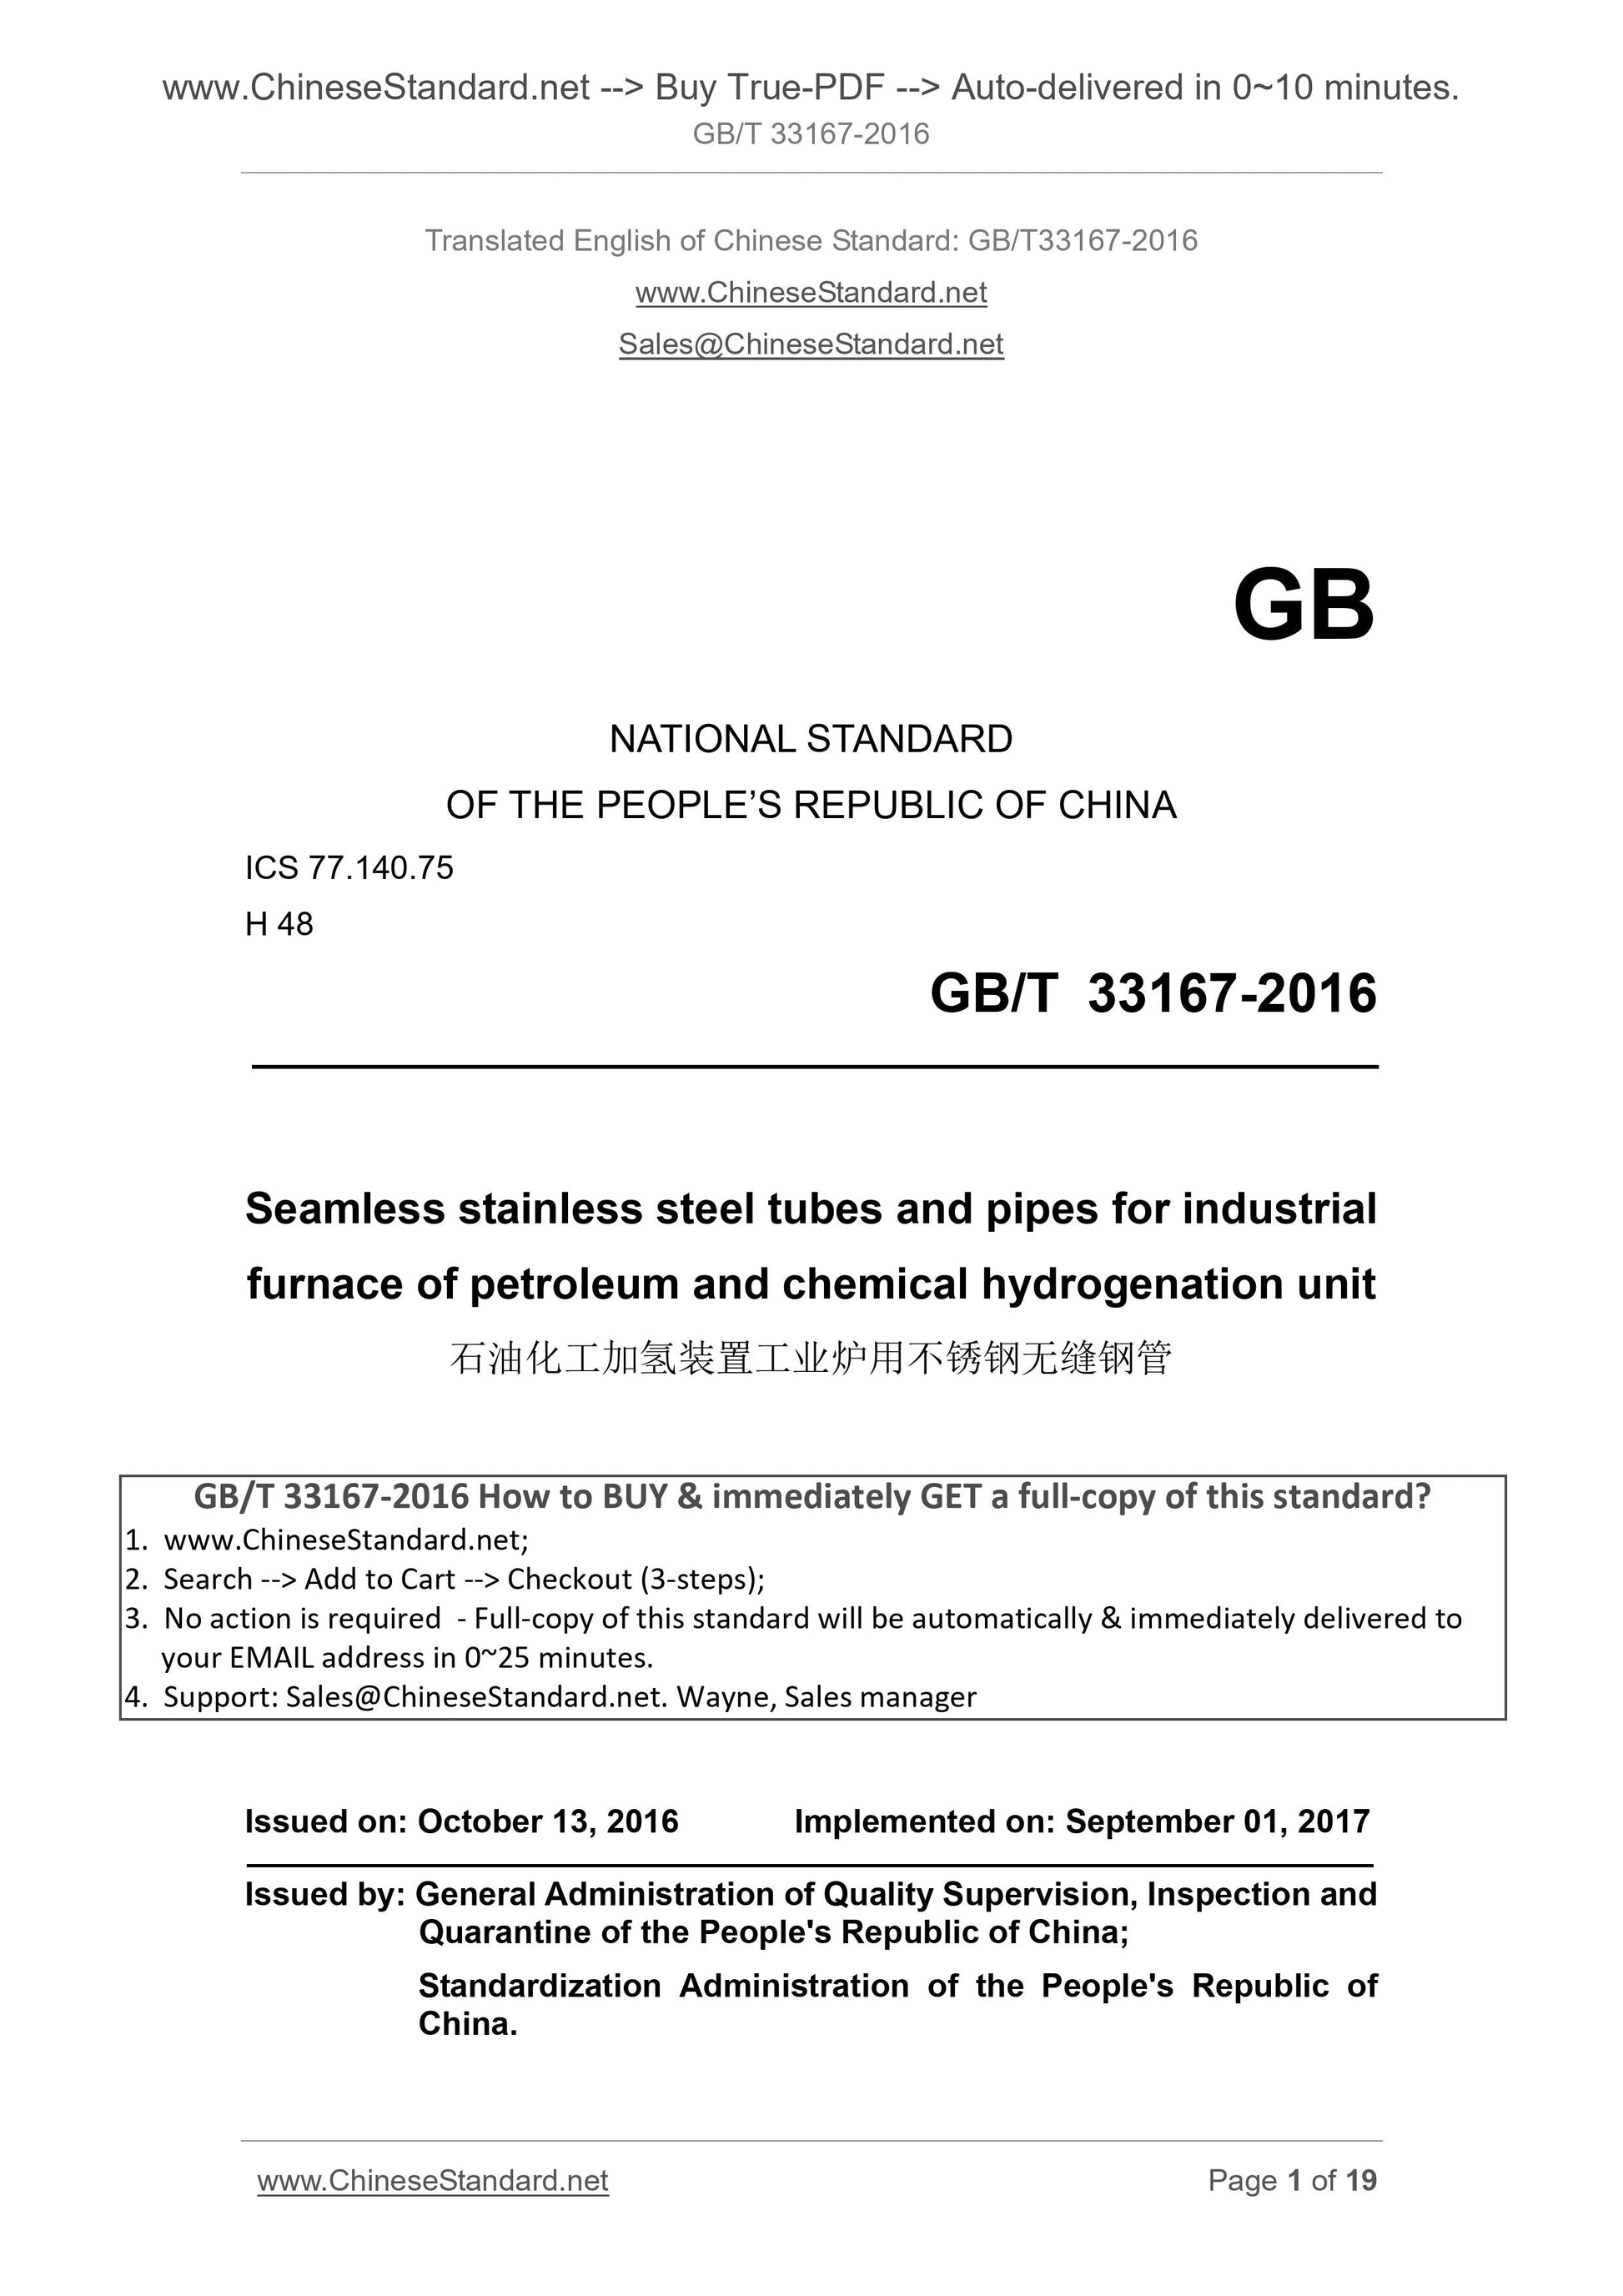 GB/T 33167-2016 Page 1